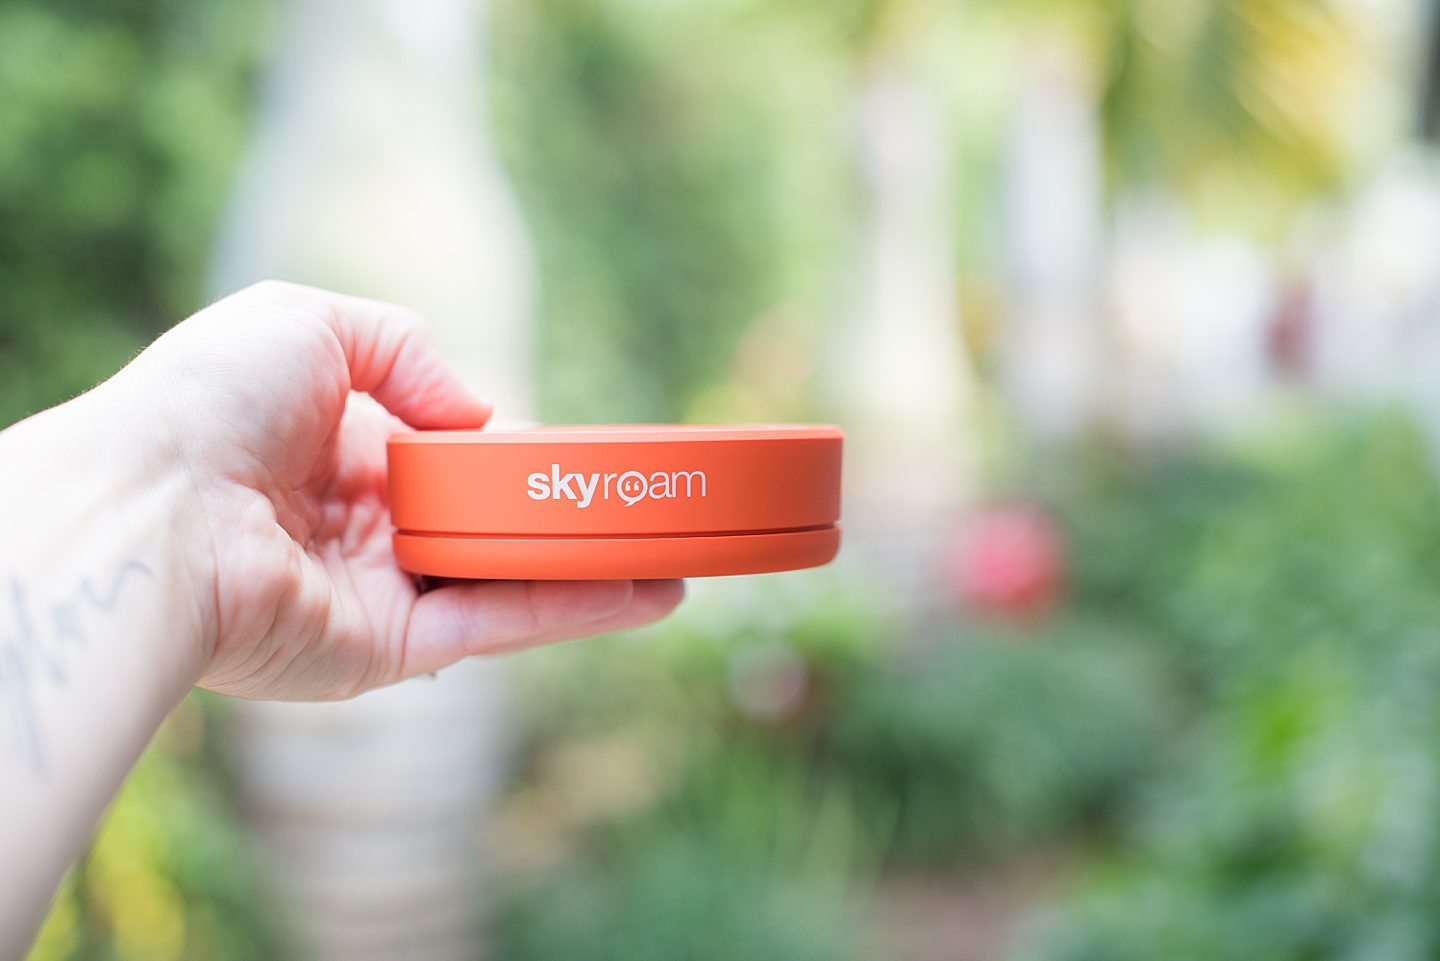 Portable travel wifi hotspot that will fit in clothes as a pocket wifi device on vacations! Skyroam is the best travel gift and essential technology for wanderlusters on the go. #skyroam #sometimeshome #wifihotspot #pocketwifi #traveltechnology